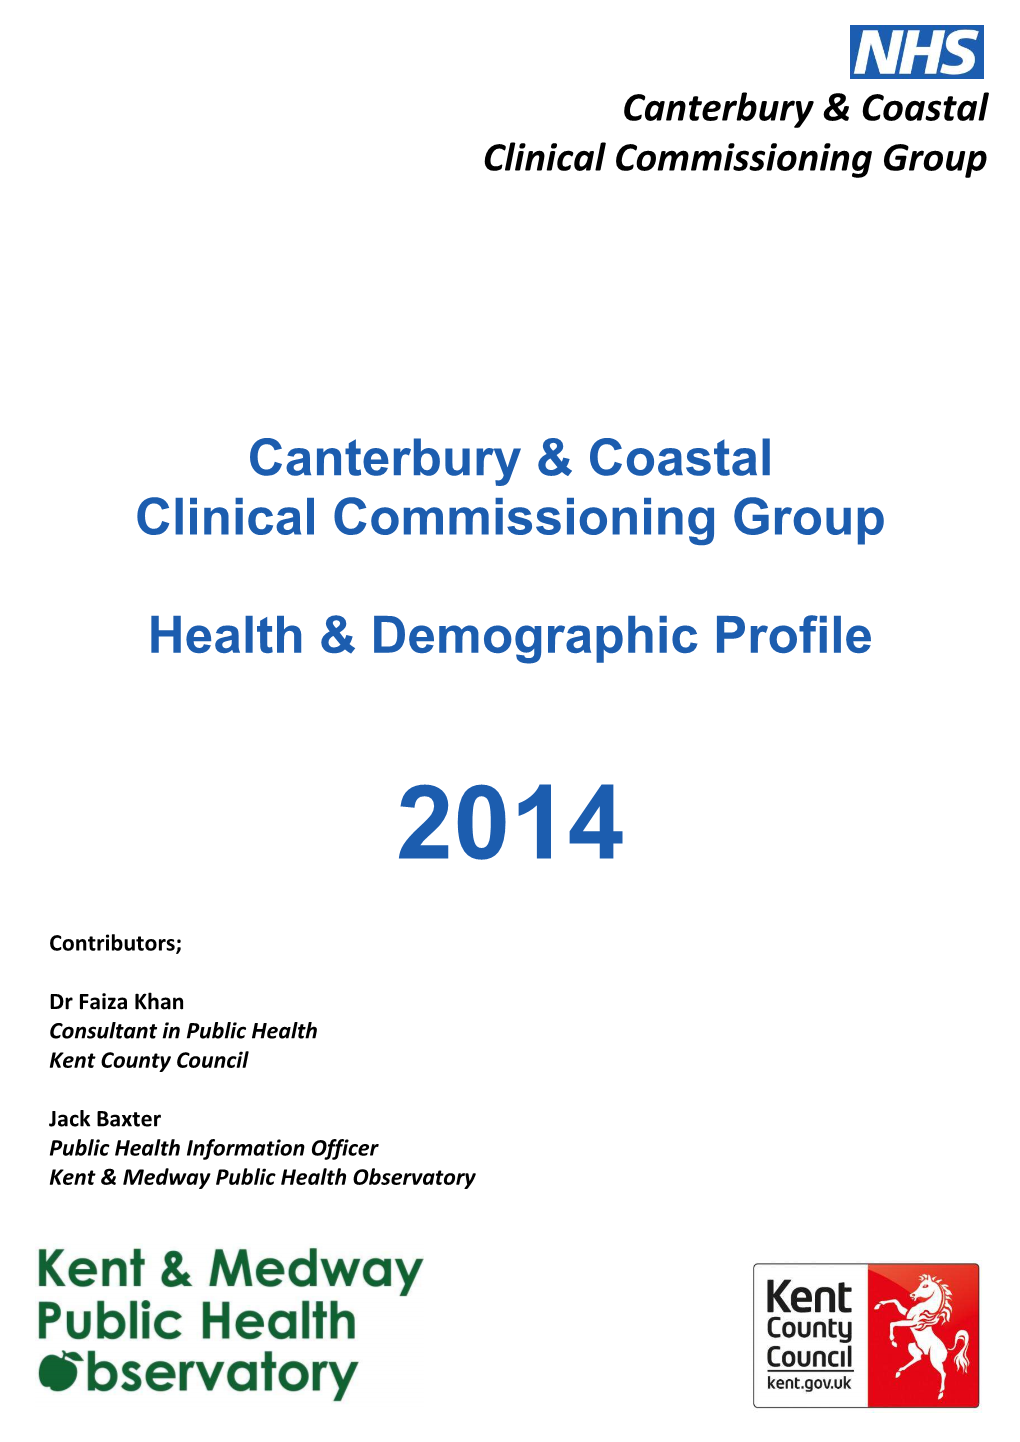 Canterbury & Coastal Clinical Commissioning Group